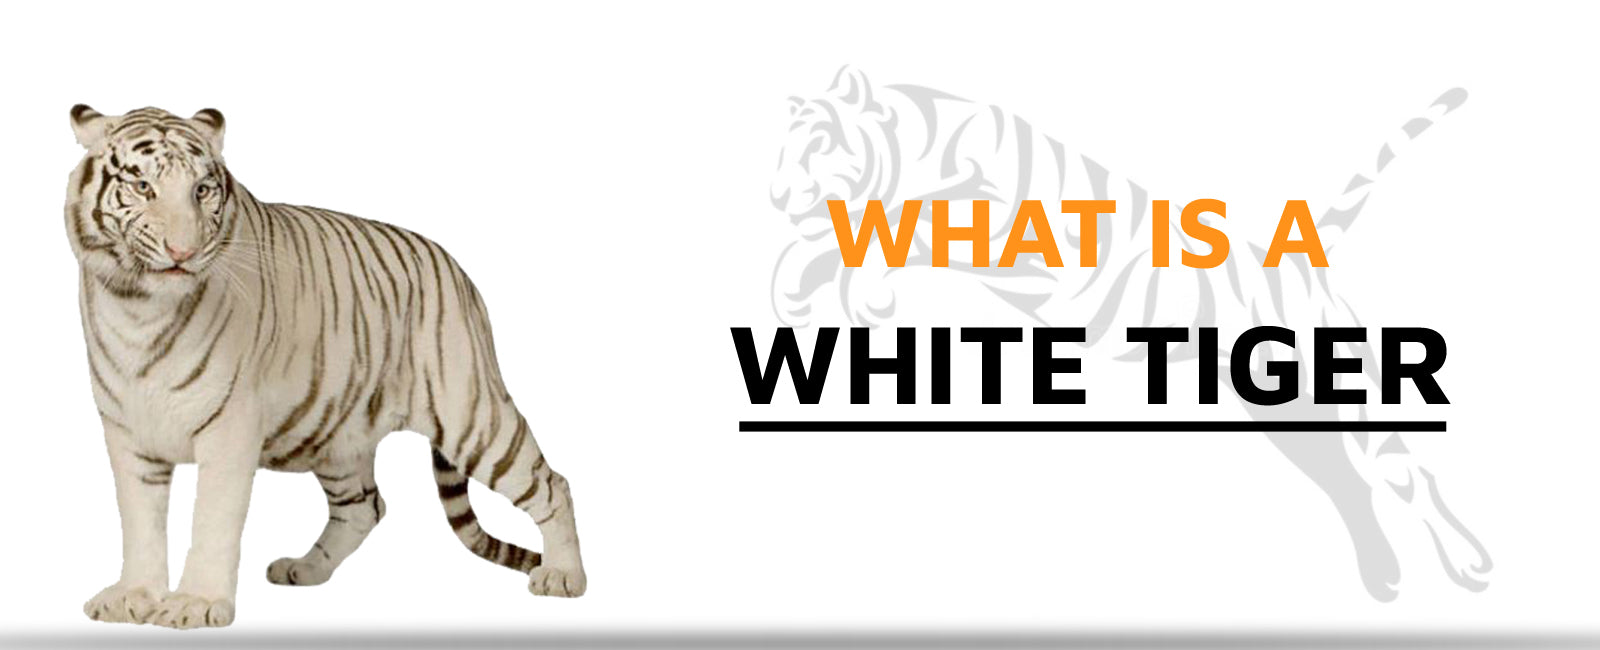 What is a White Tiger?